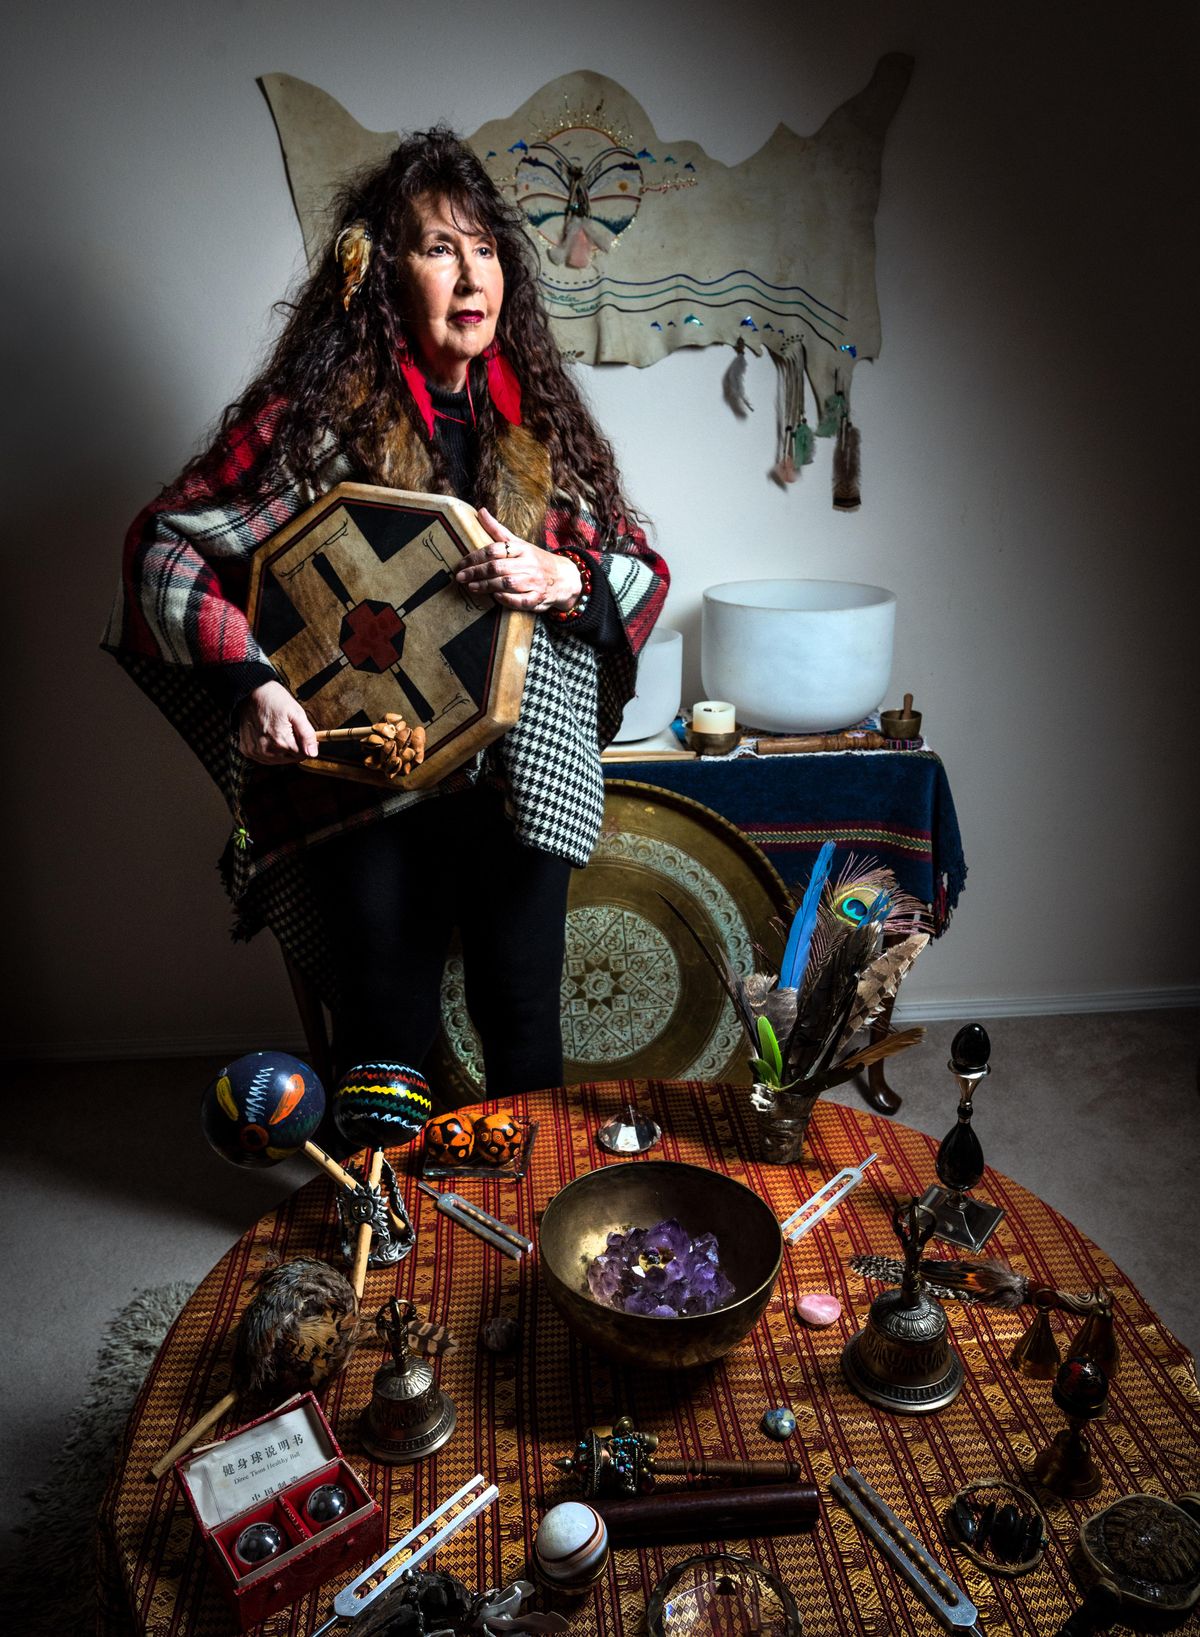 Jea’nah Jens is a mystic shaman and tarot card reader who incorporates sound therapy in her sessions with crystal bowls, drums, rattles, bells, tuning forks and other instruments. Jens said sound vibrates to the cellular level and helps detoxify a person. (Colin Mulvany / The Spokesman-Review)